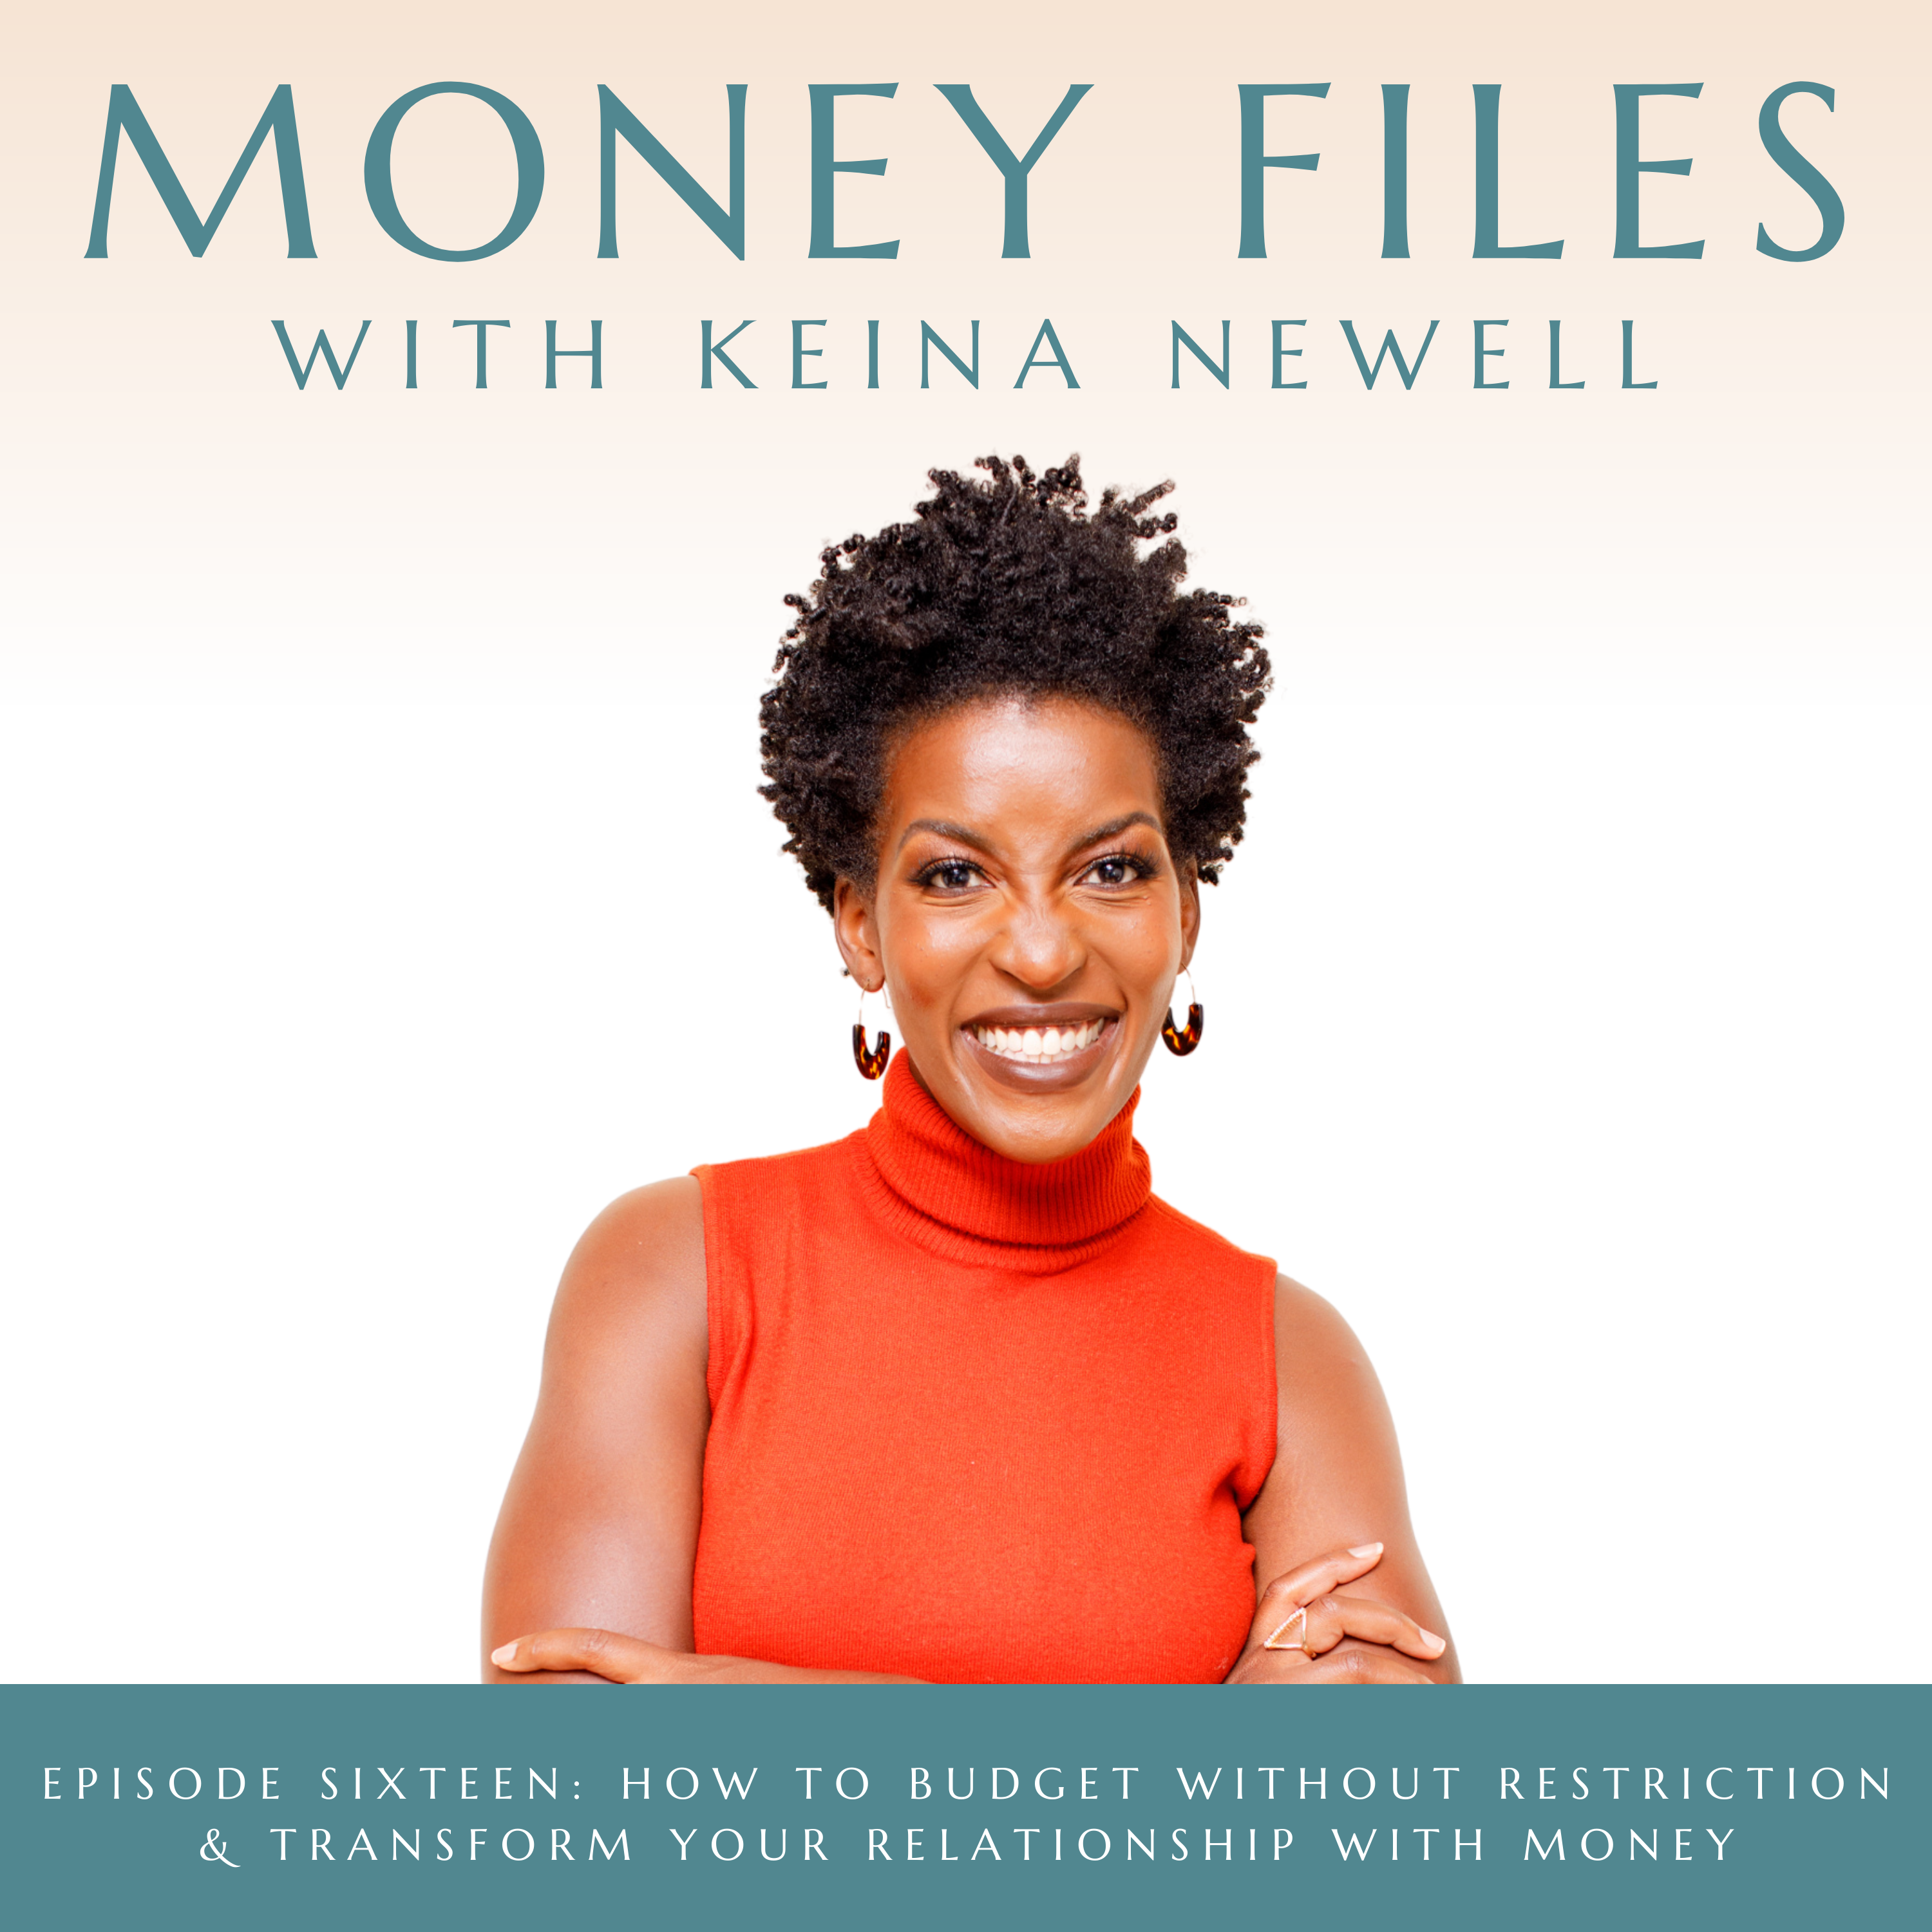 How to Start Budgeting Without Restriction & Transform Your Relationship With Money